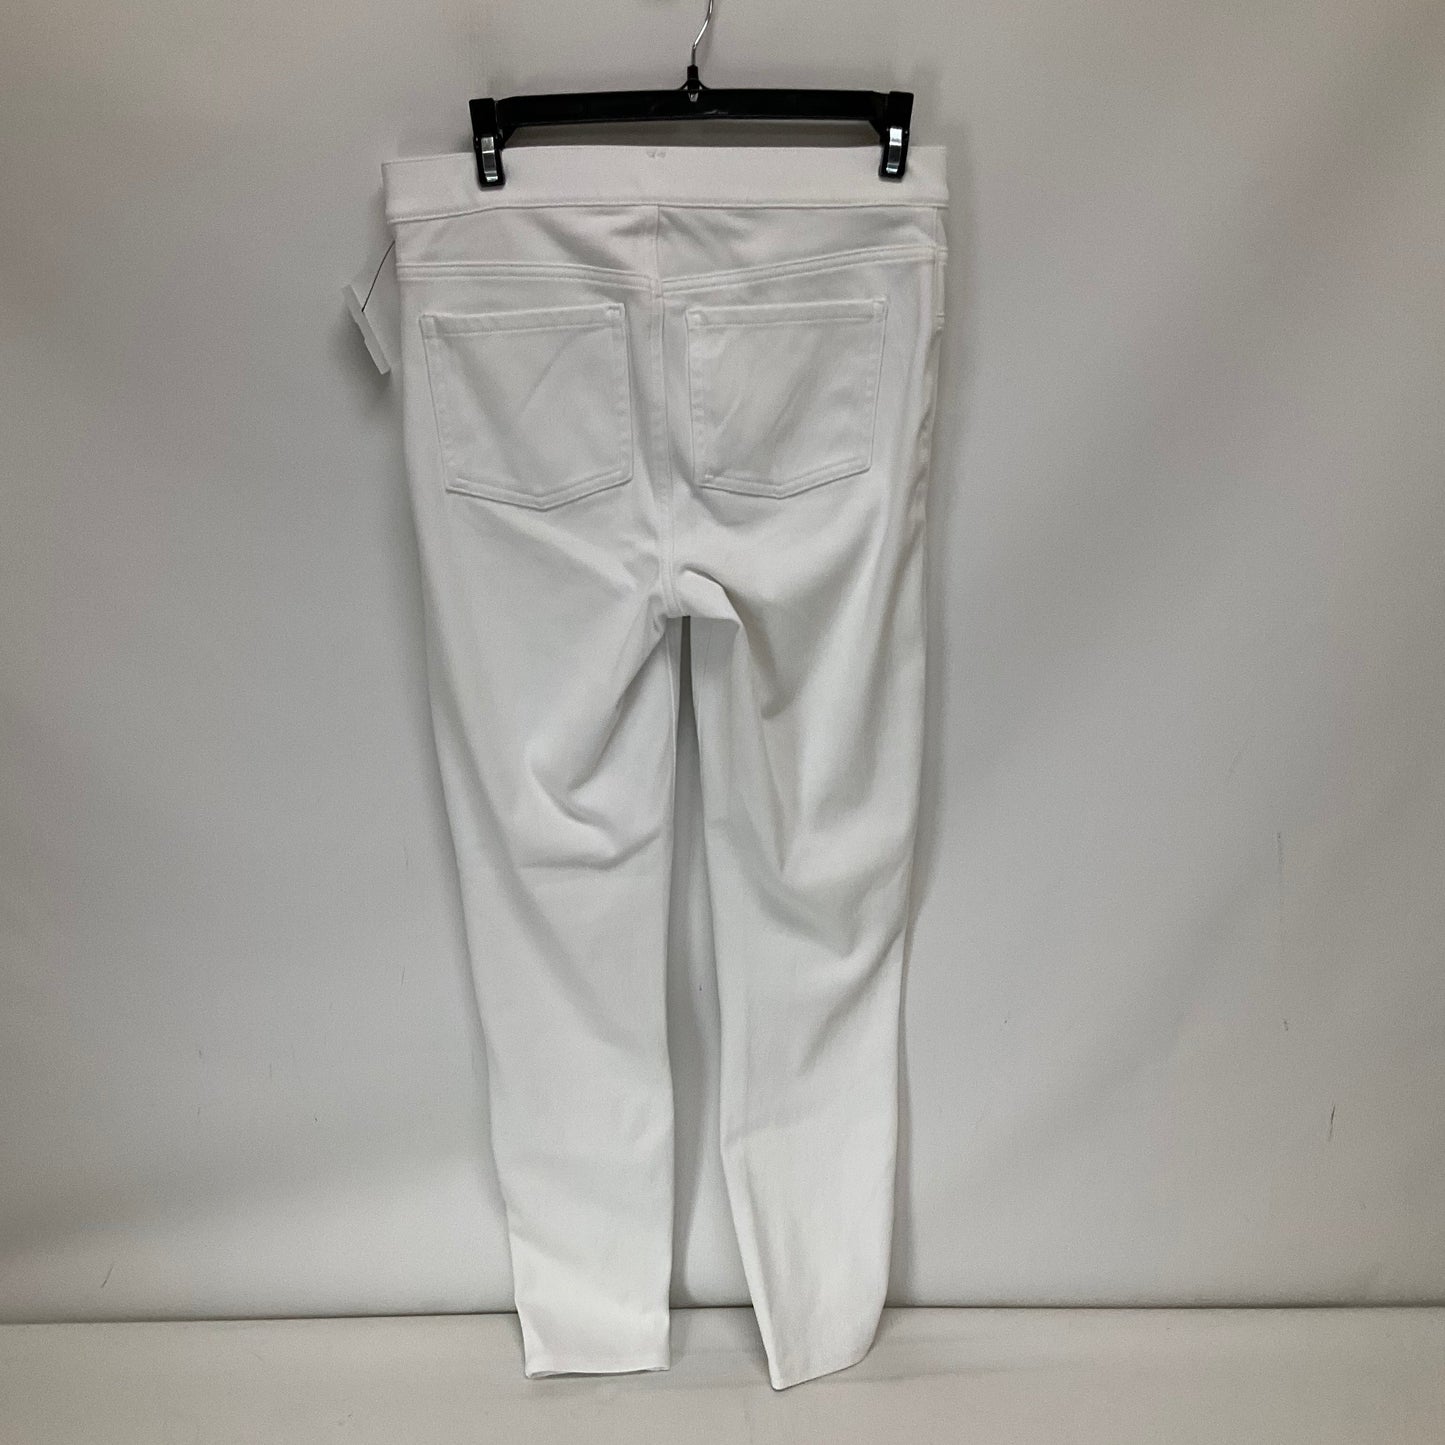 White Pants Other Spanx, Size M